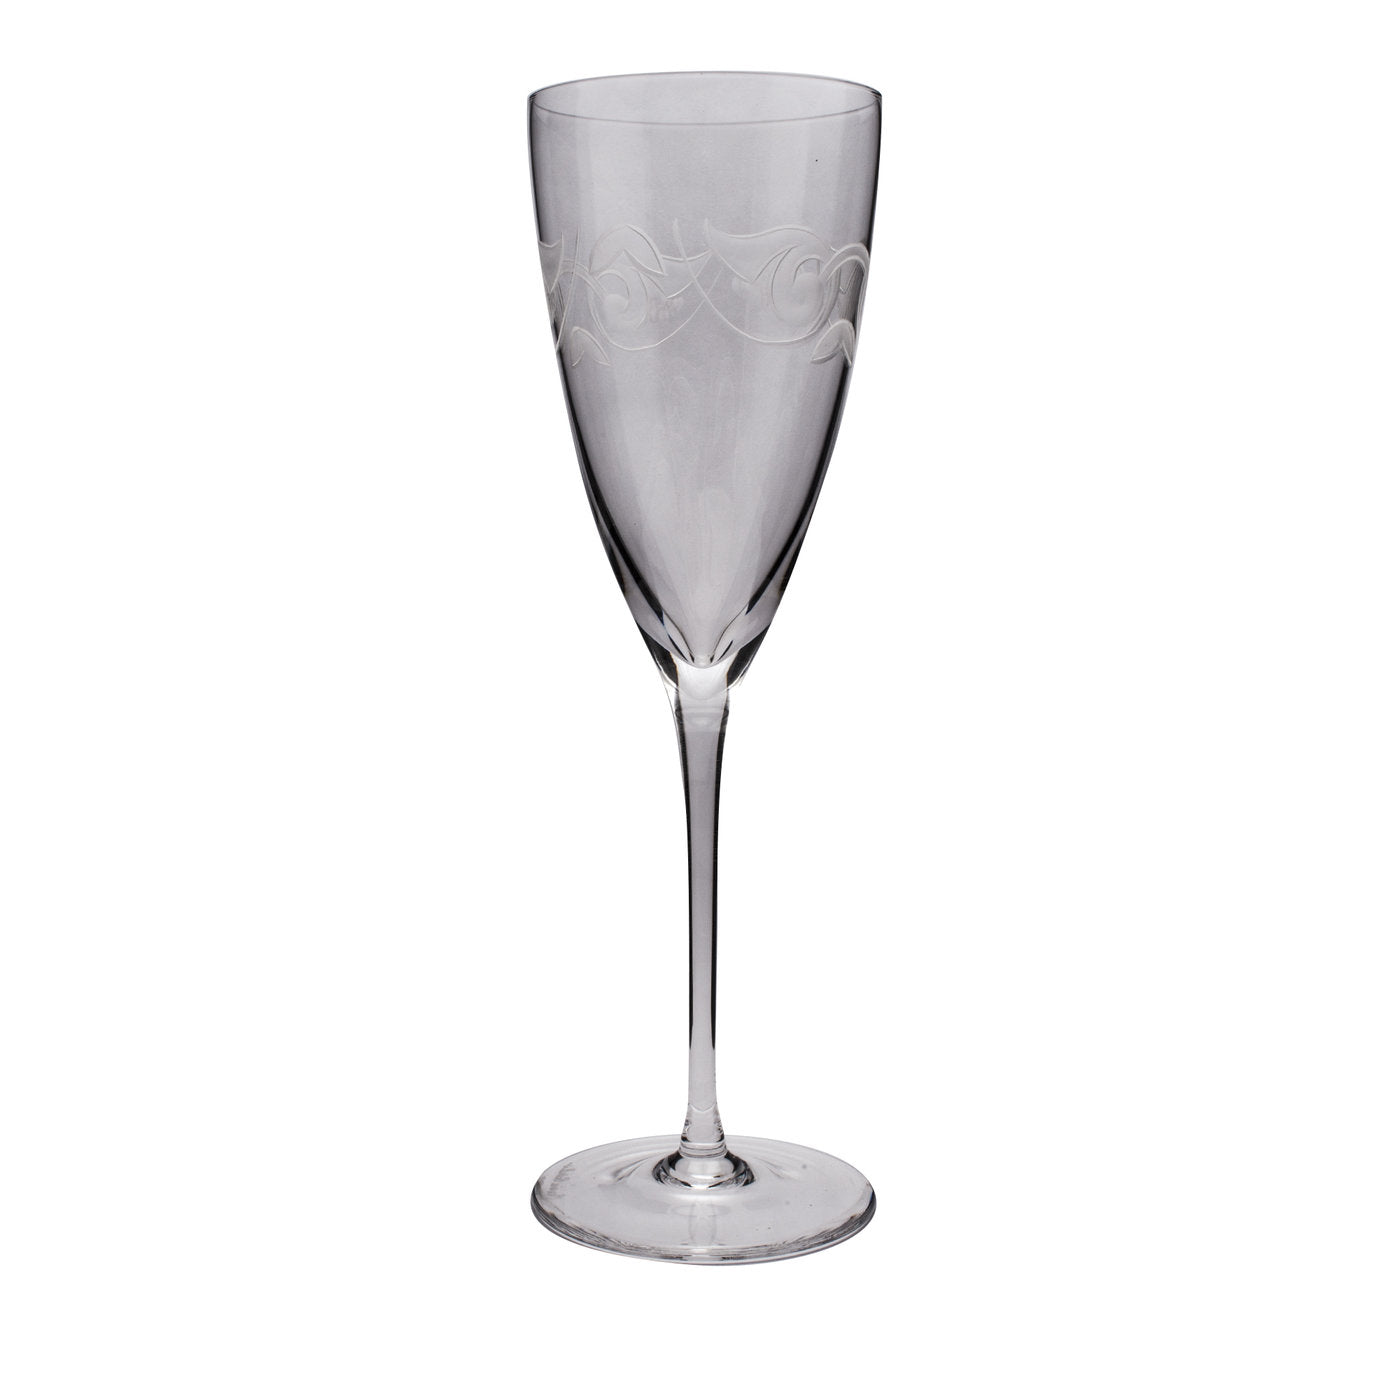 Set of 6 Water Glasses - Alternative view 2